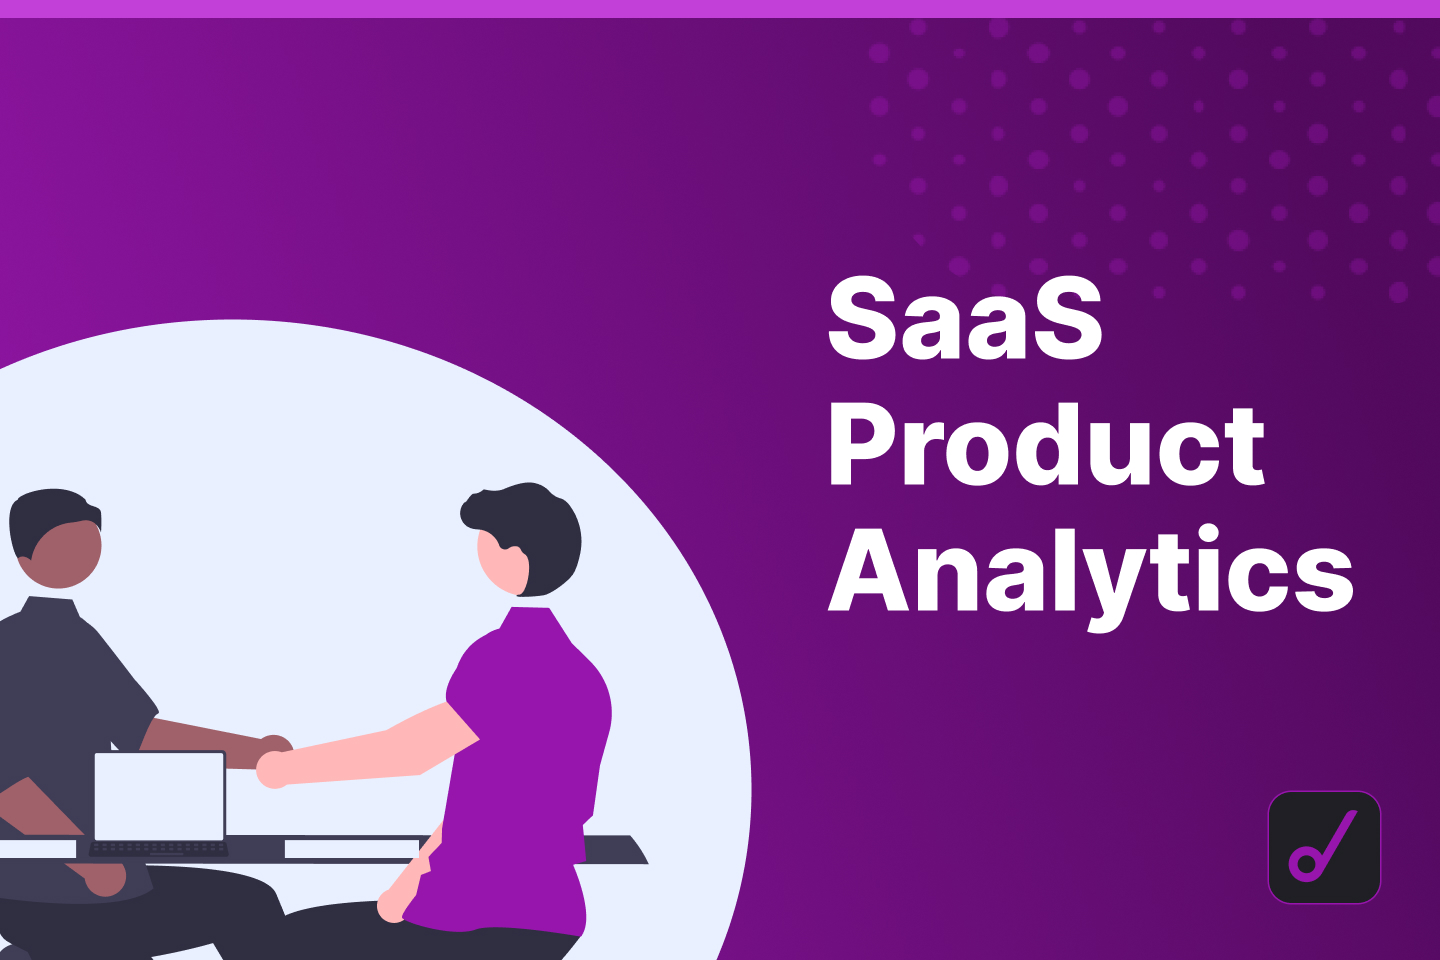 A Complete Guide To SaaS Product Analytics